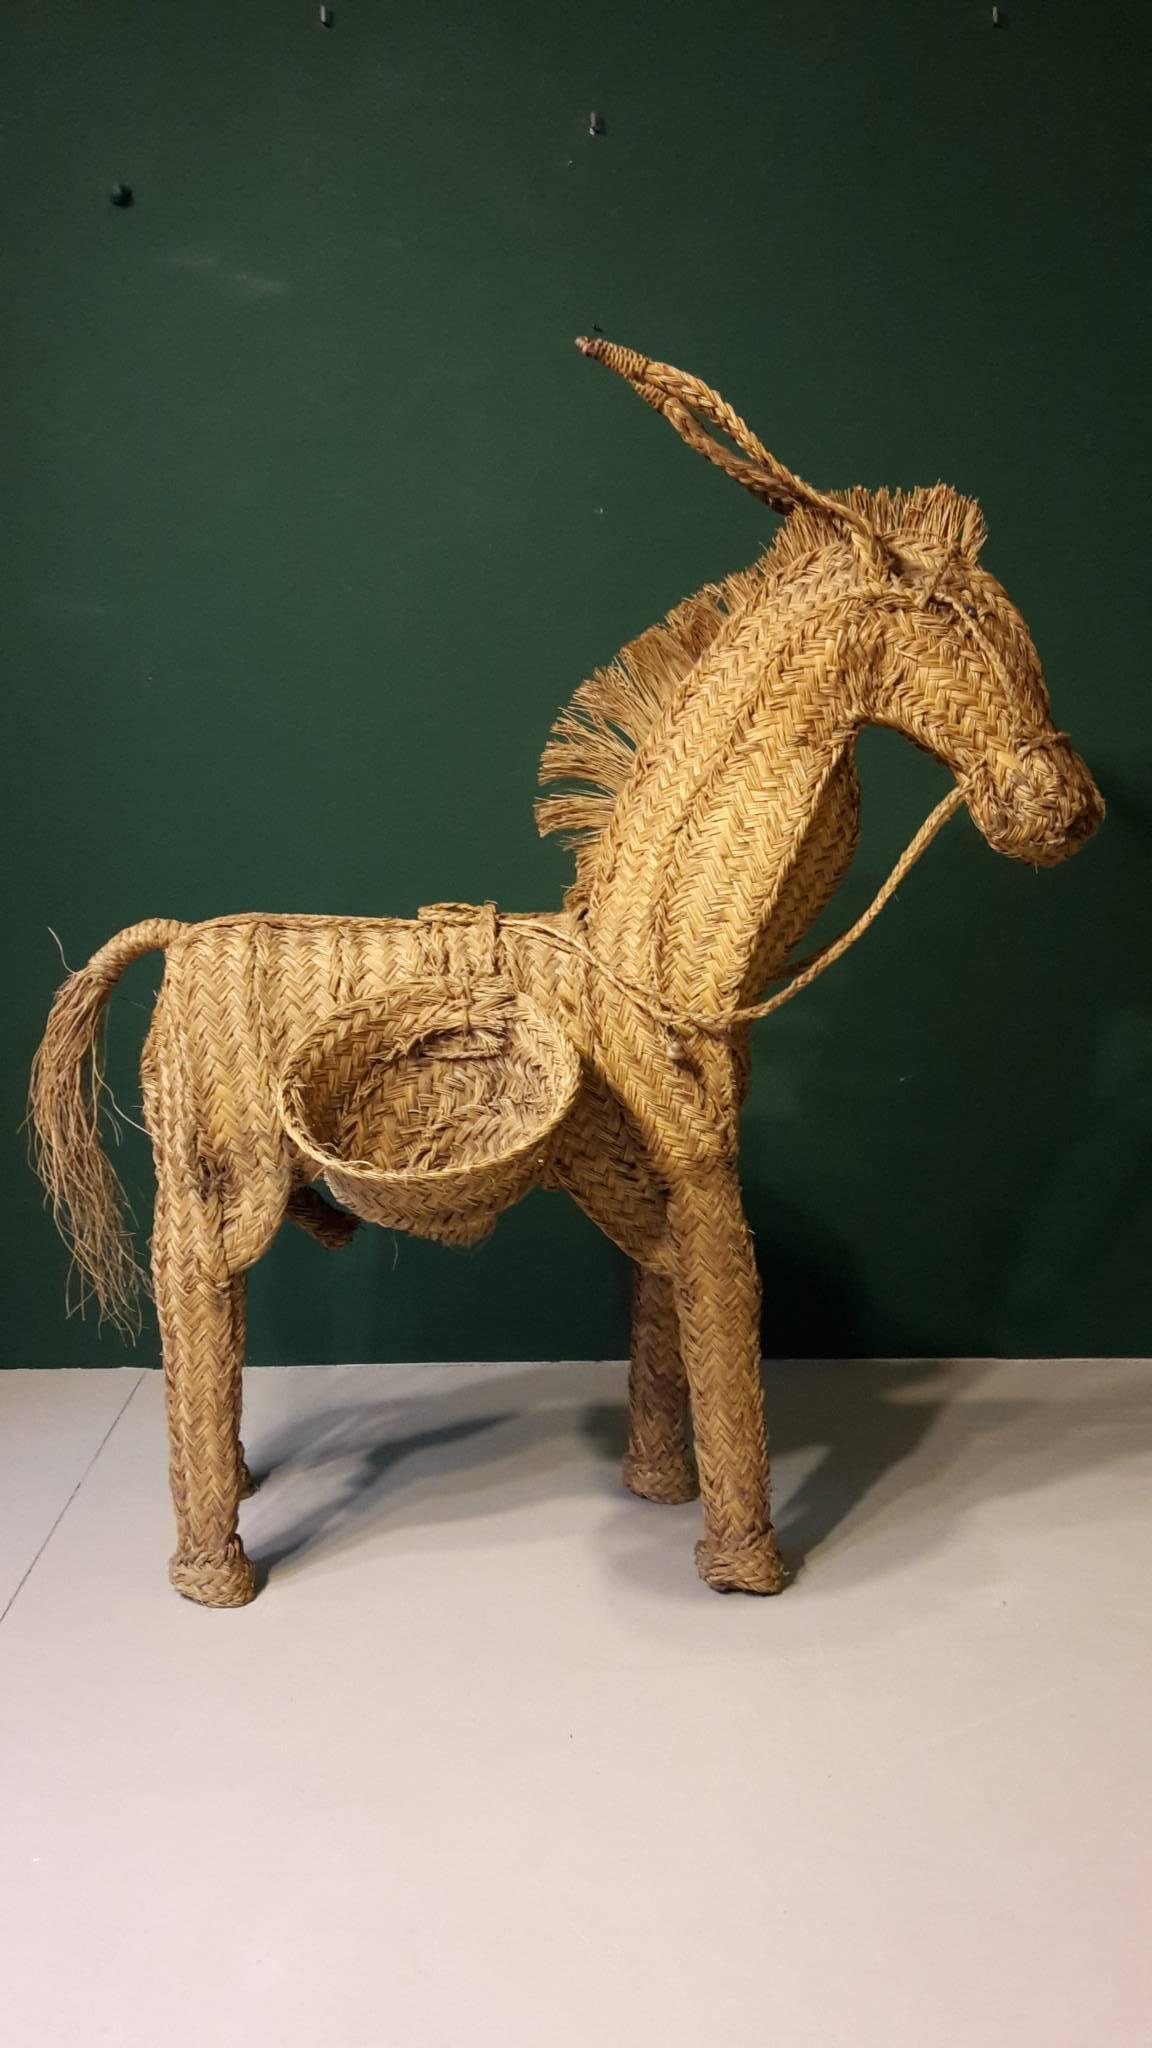 20th century French folk art donkey made of palm frond, 1960s.